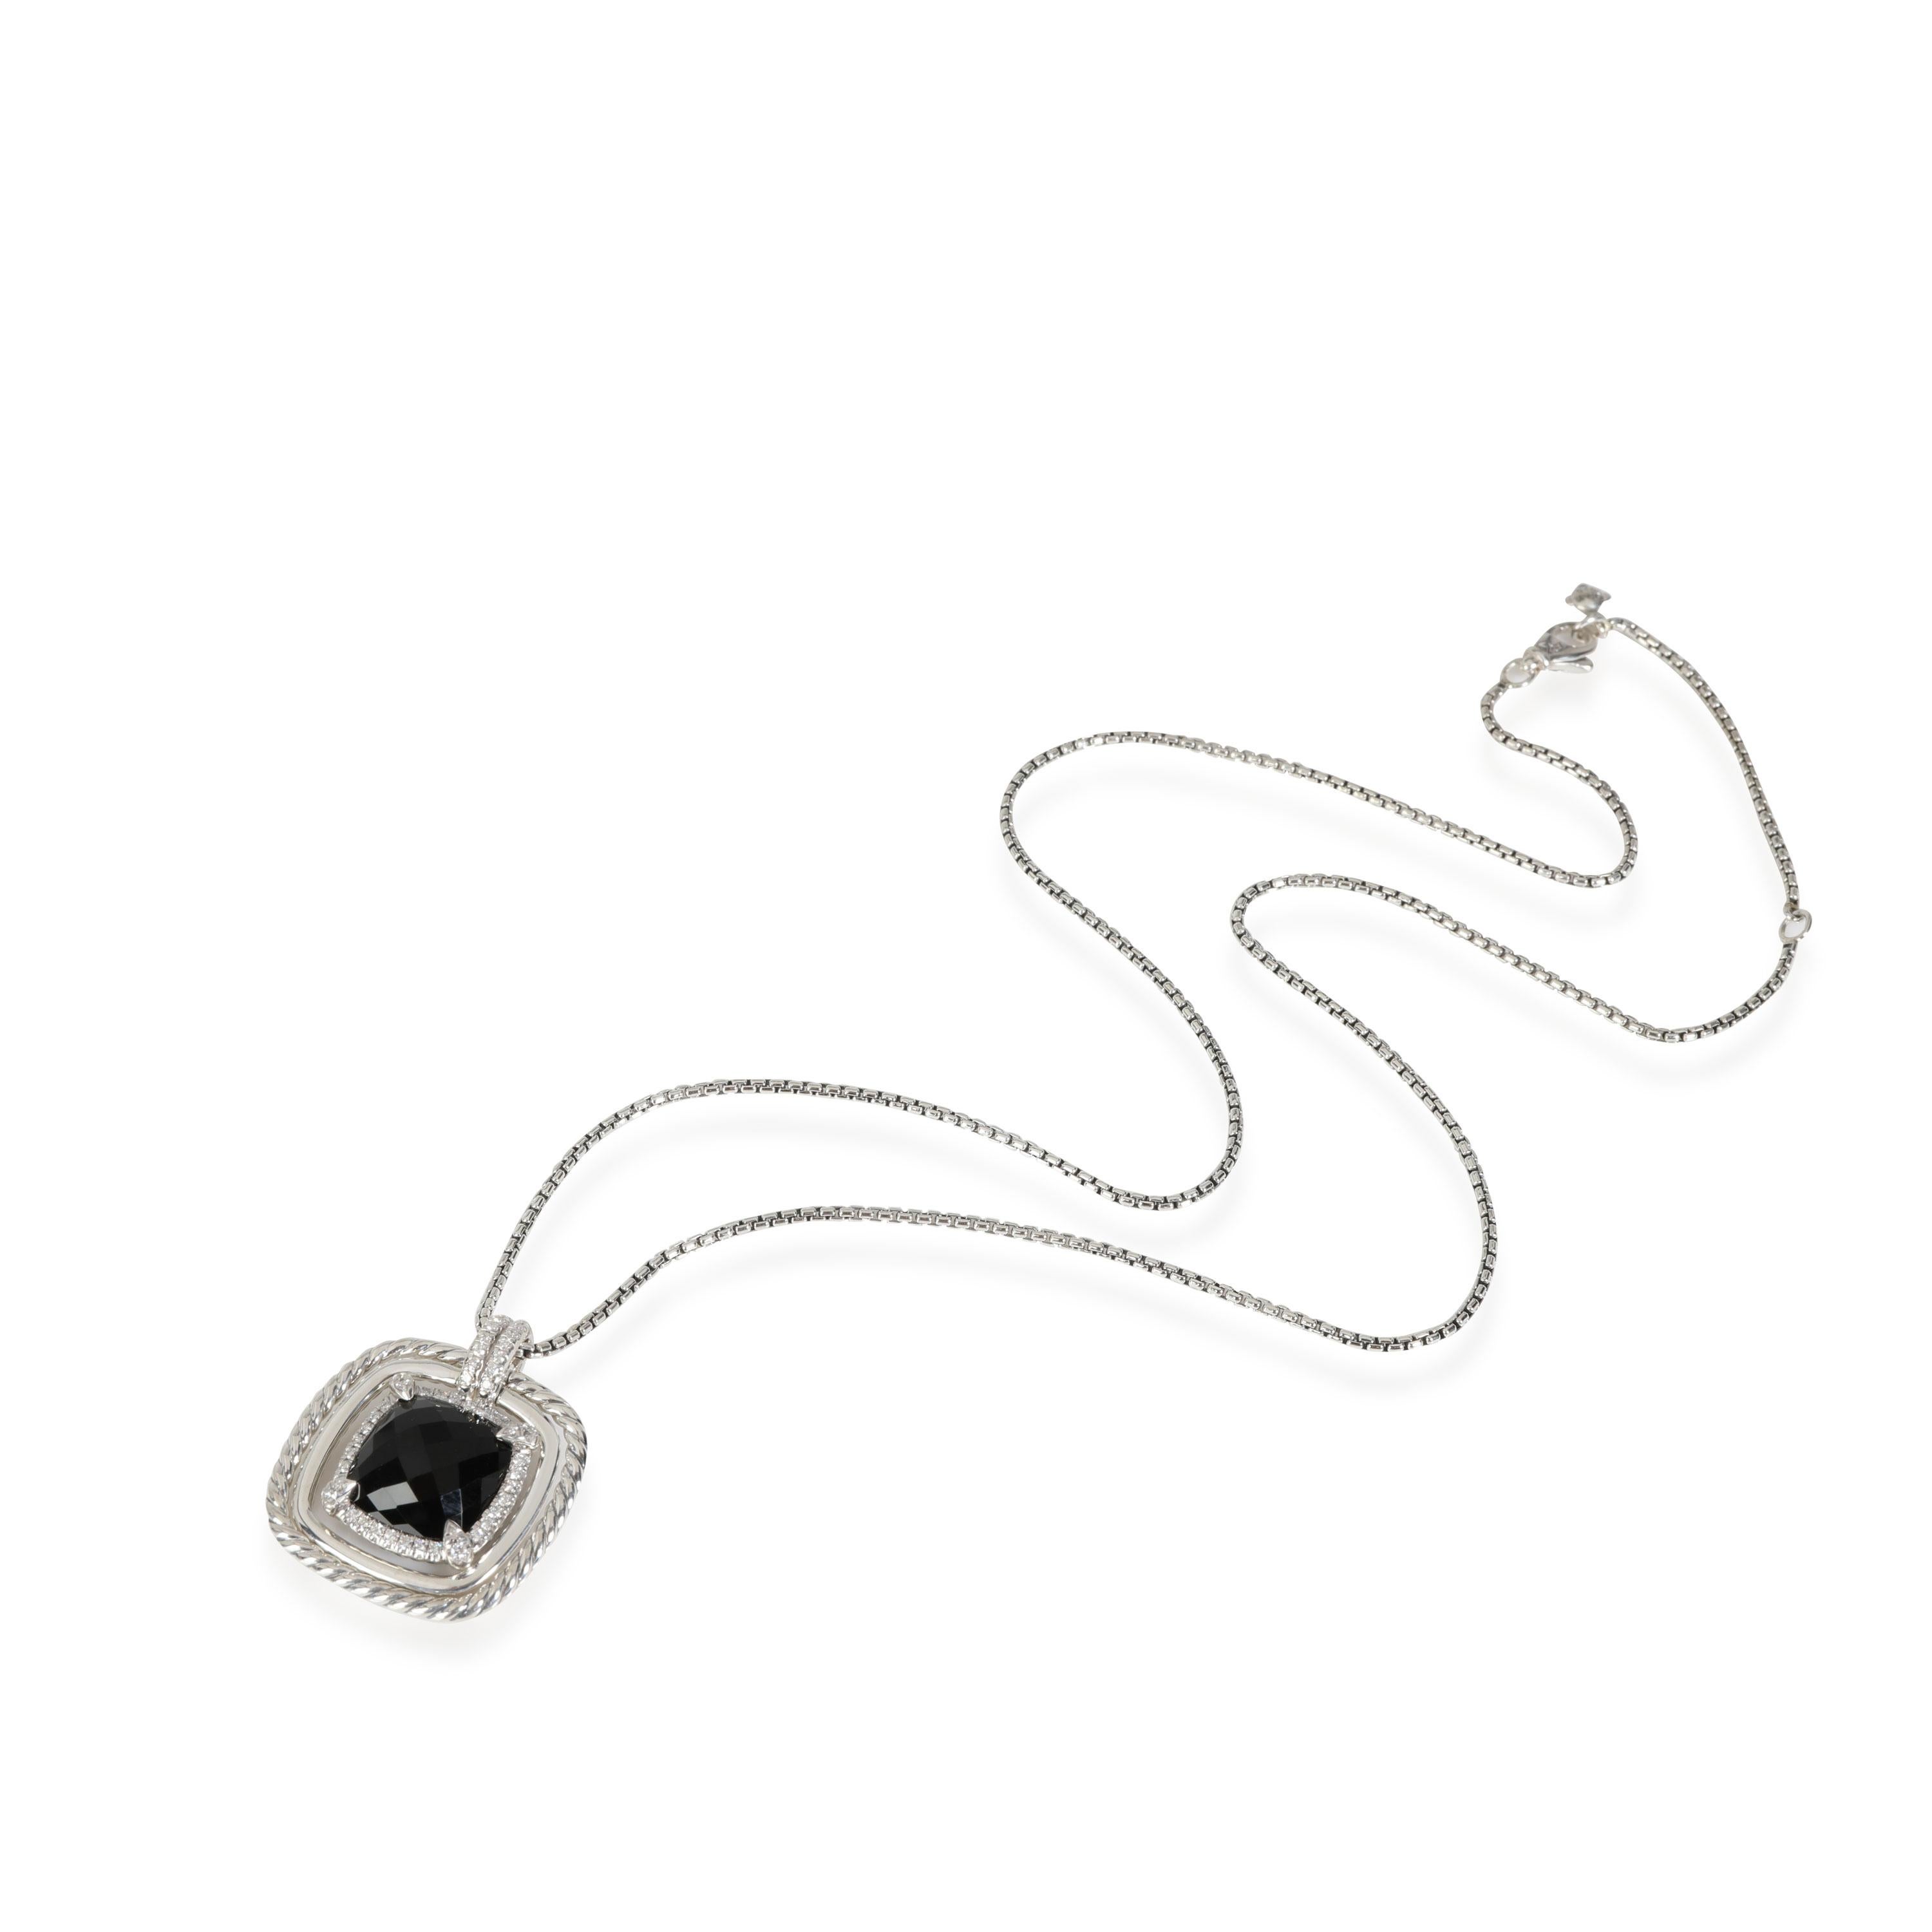 David Yurman Chatelaine Onyx Diamond Pendant in  Sterling Silver 0.46 CTW

PRIMARY DETAILS
SKU: 115344
Listing Title: David Yurman Chatelaine Onyx Diamond Pendant in  Sterling Silver 0.46 CTW
Condition Description: Length is adjustable. Retails for